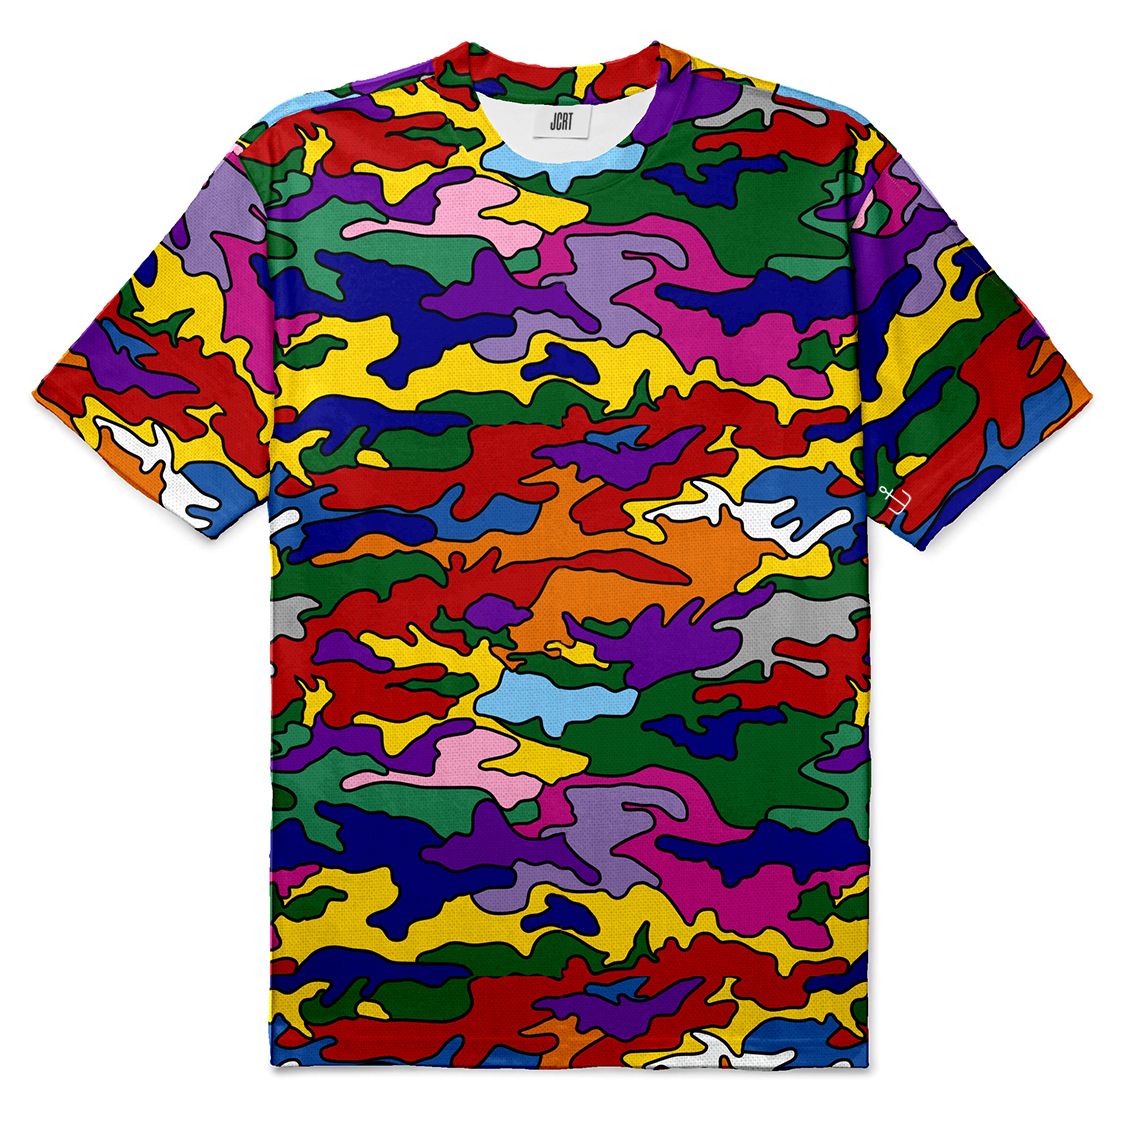 The Pride Camouflage T-Shirt